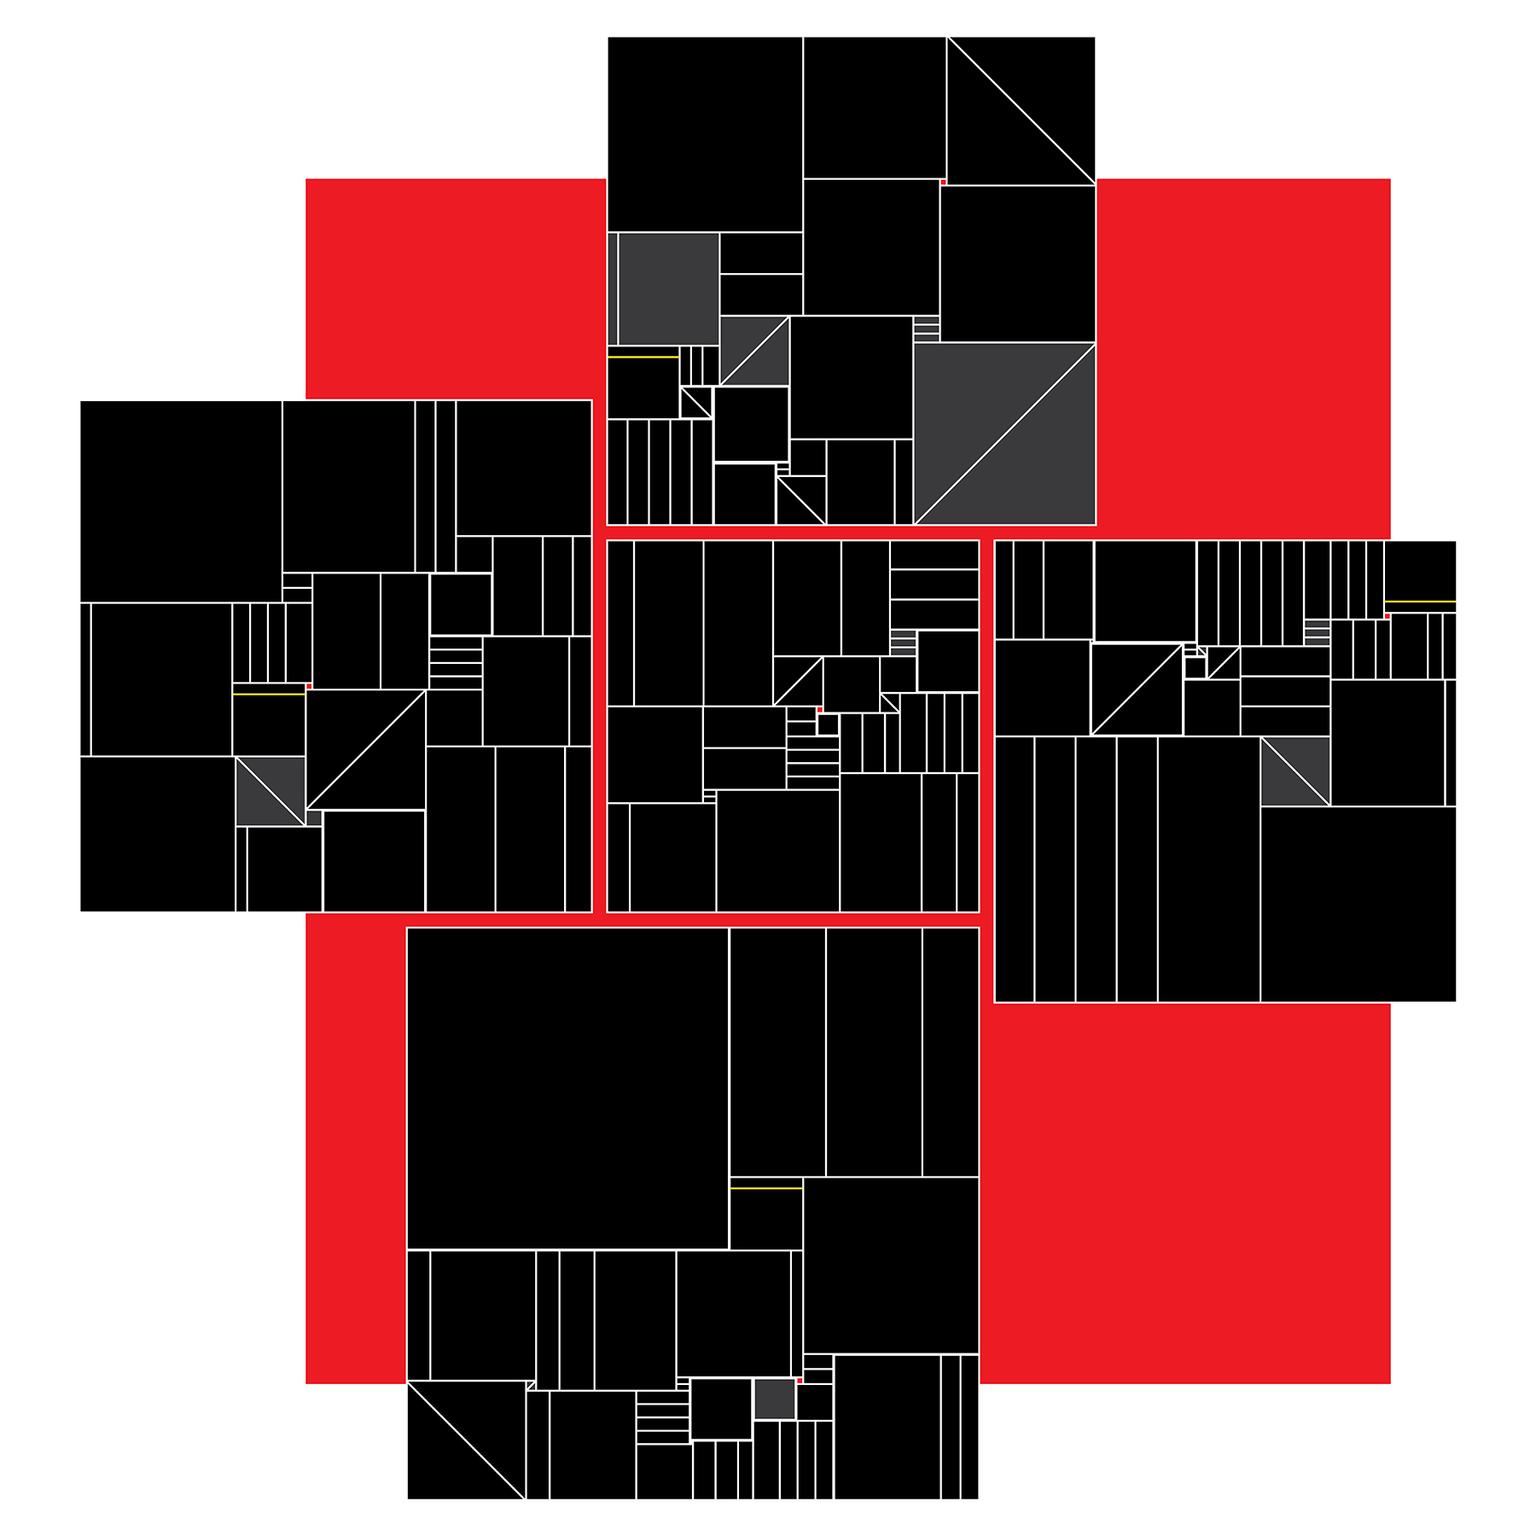 Image for entry 'A Quintet of Squared Squares'